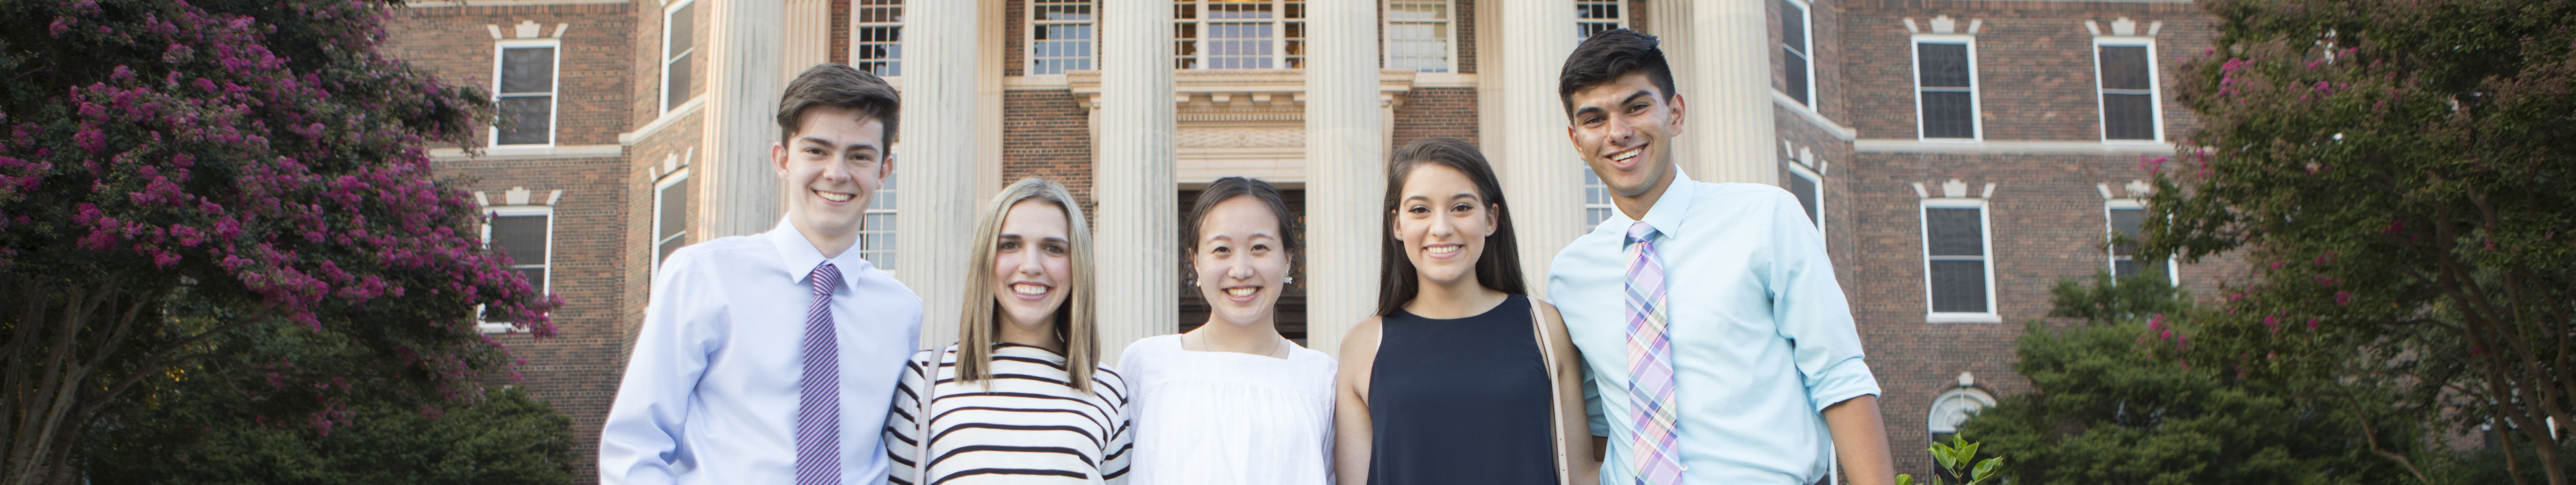 Five students stand with their arms around each other and the iconic pillars of Dallas Hall visible behind them.